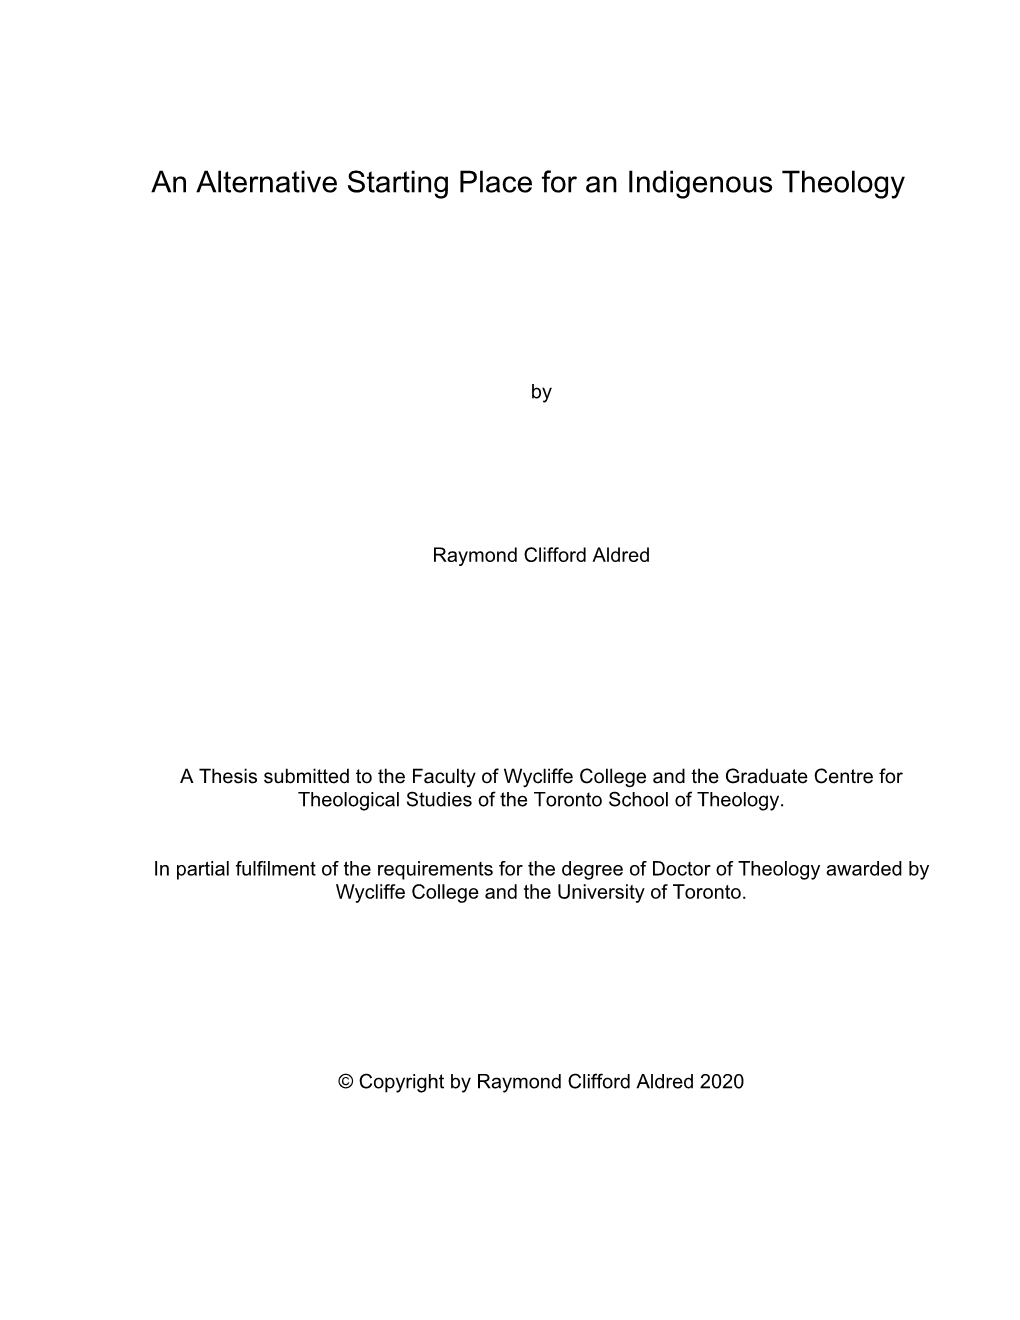 An Alternative Starting Place for an Indigenous Theology